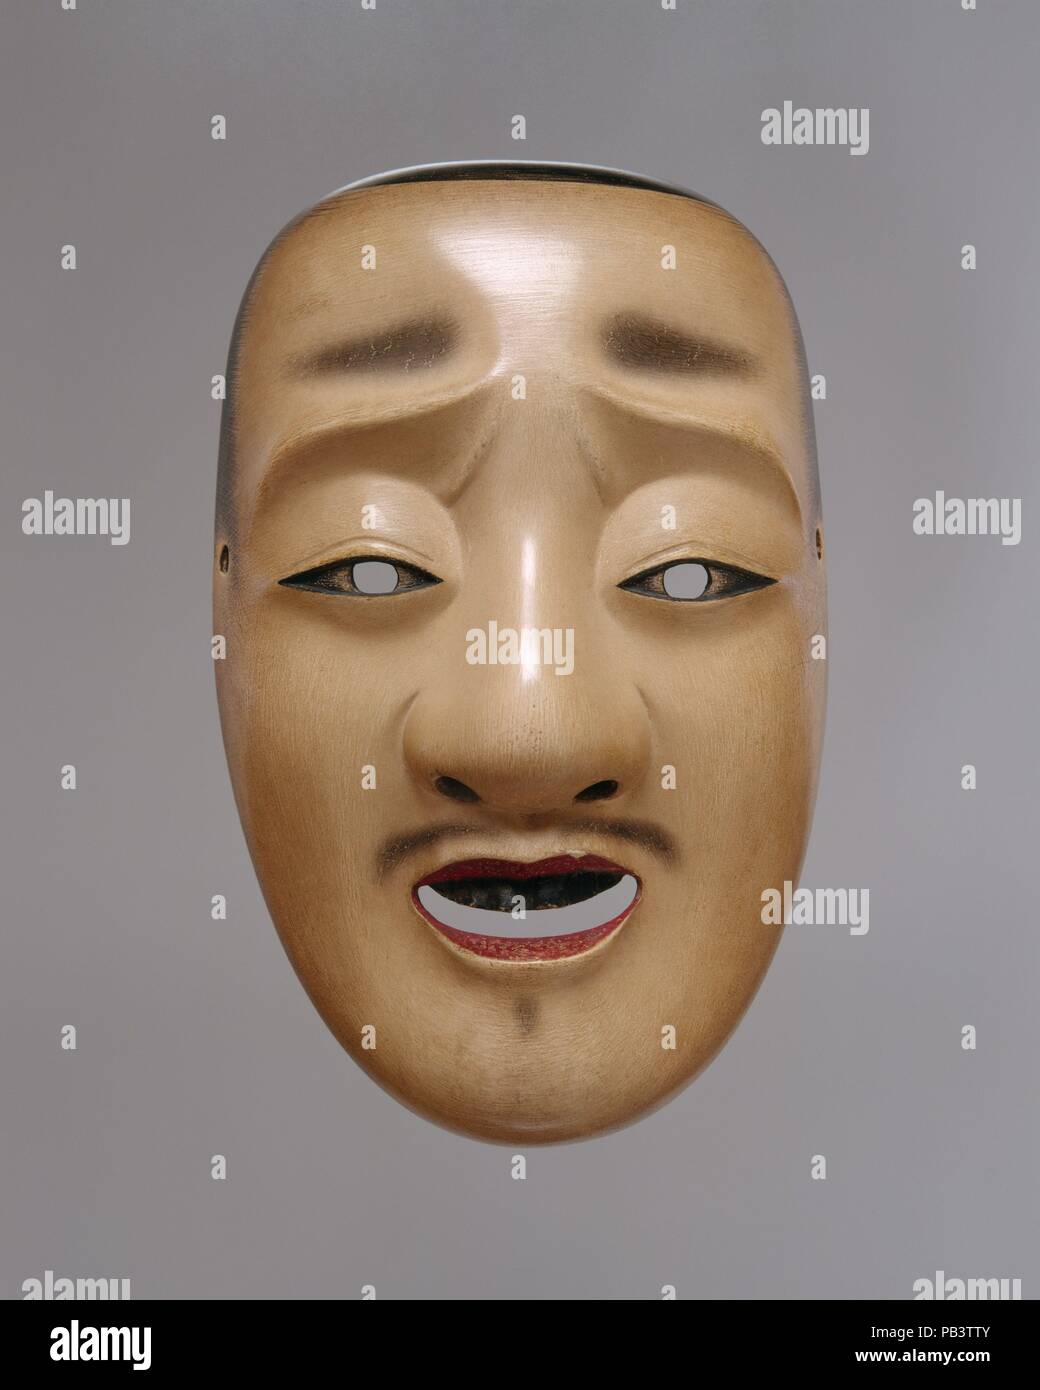 Chujo Mask for a Noh Drama. Artist: Genkyu Michinaga (Japanese, active second half of the 17th century). Culture: Japan. Dimensions: W. 5 1/2 in. (14 cm); L. 8 1/2 in. (21.6 cm). Date: 18th century.  Chujo is a mask worn for roles of young male aristocrats, such as the tragic heroes of the Heike clan. Museum: Metropolitan Museum of Art, New York, USA. Stock Photo